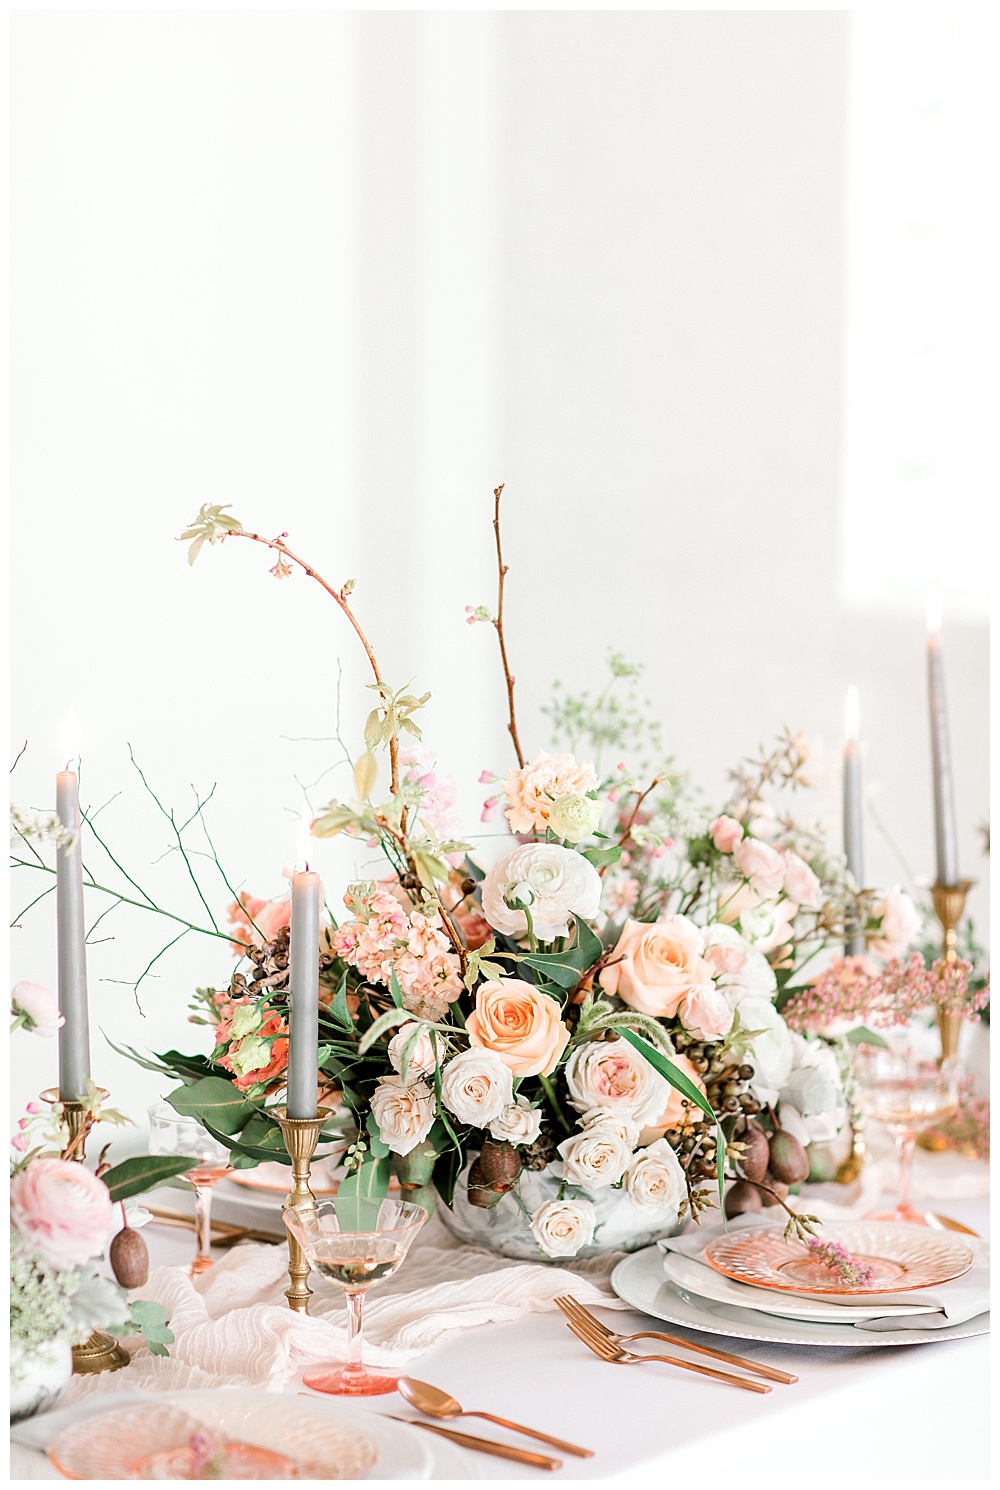 Styled Shoot with Springtime Vibes